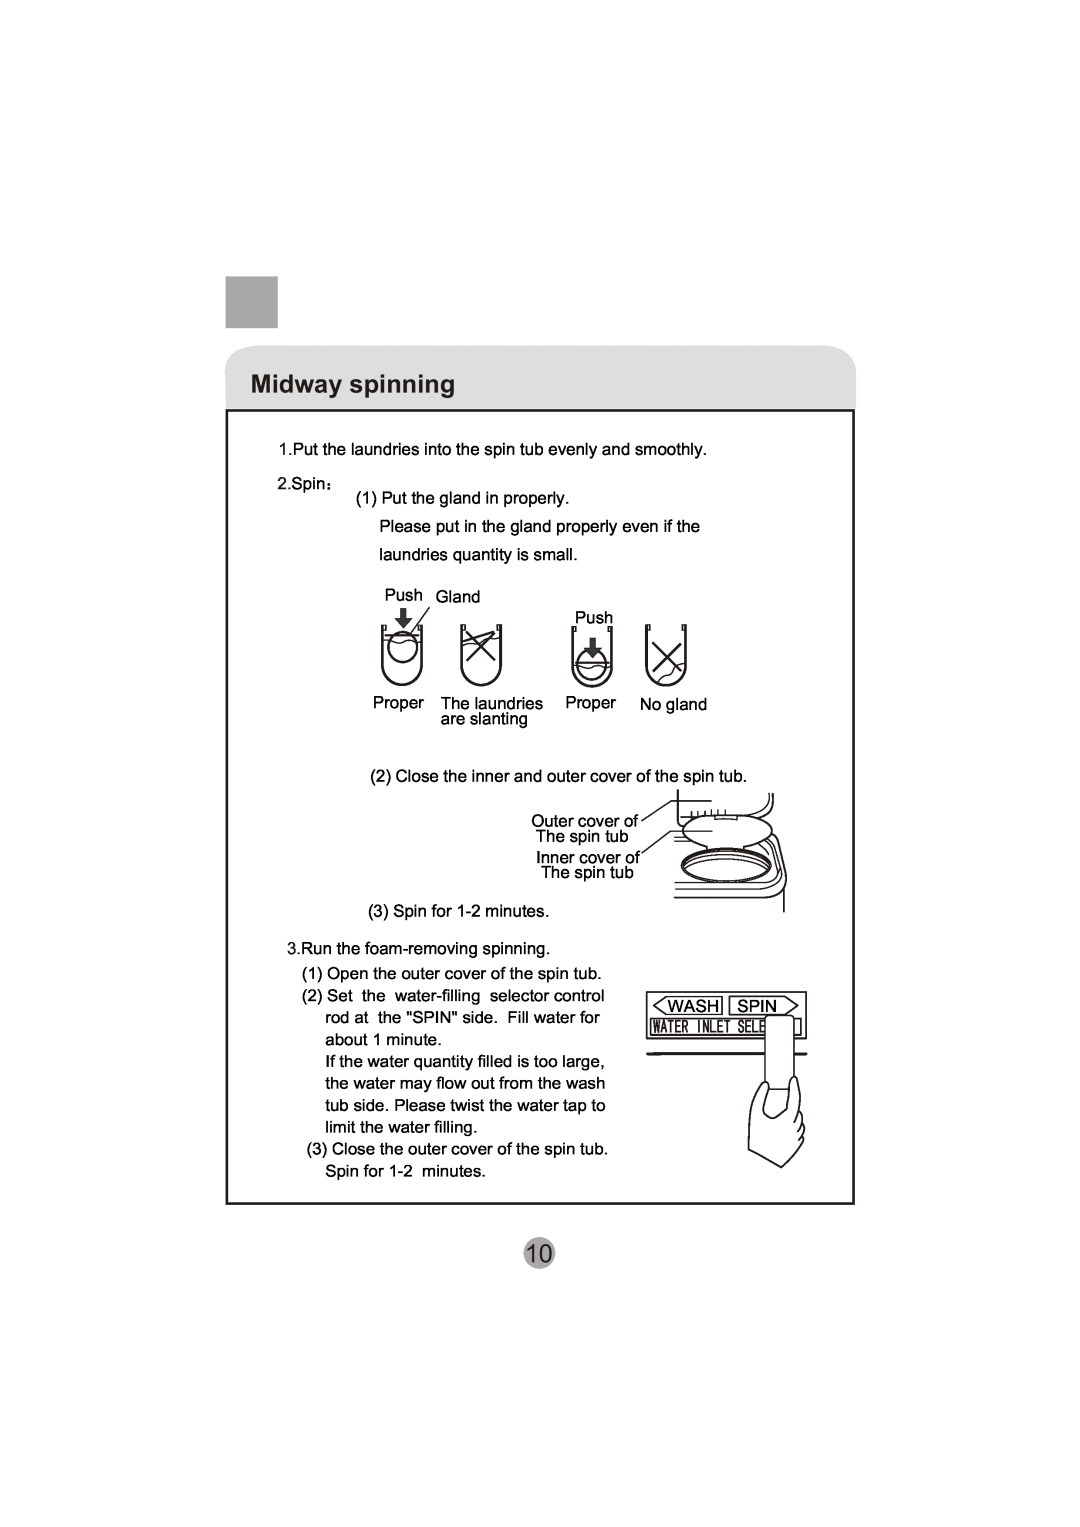 Haier XPB60-113S user manual Midway spinning, Wash Spin 